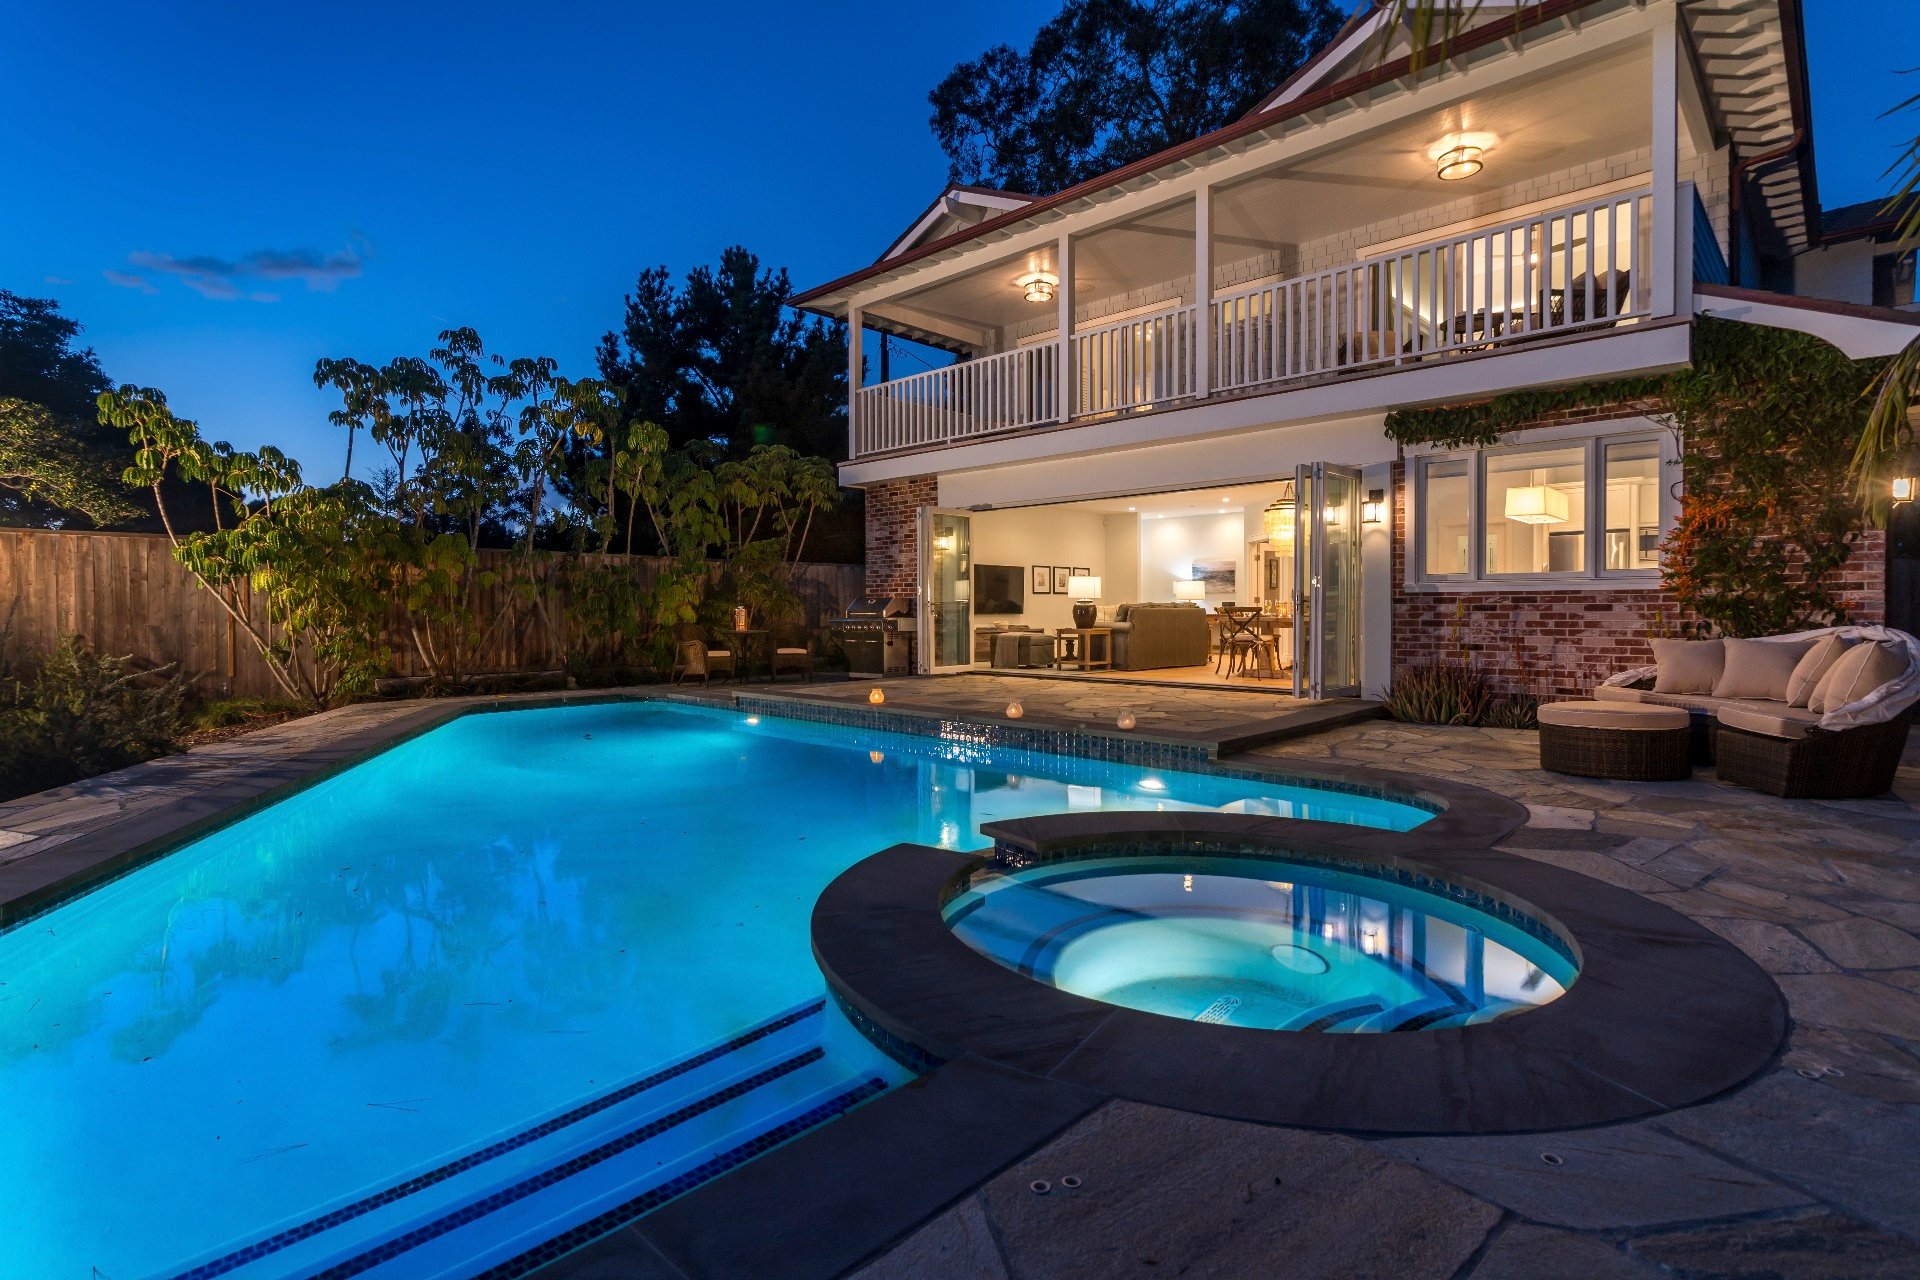 the pool and hot tub settings are controlled from inside the home.